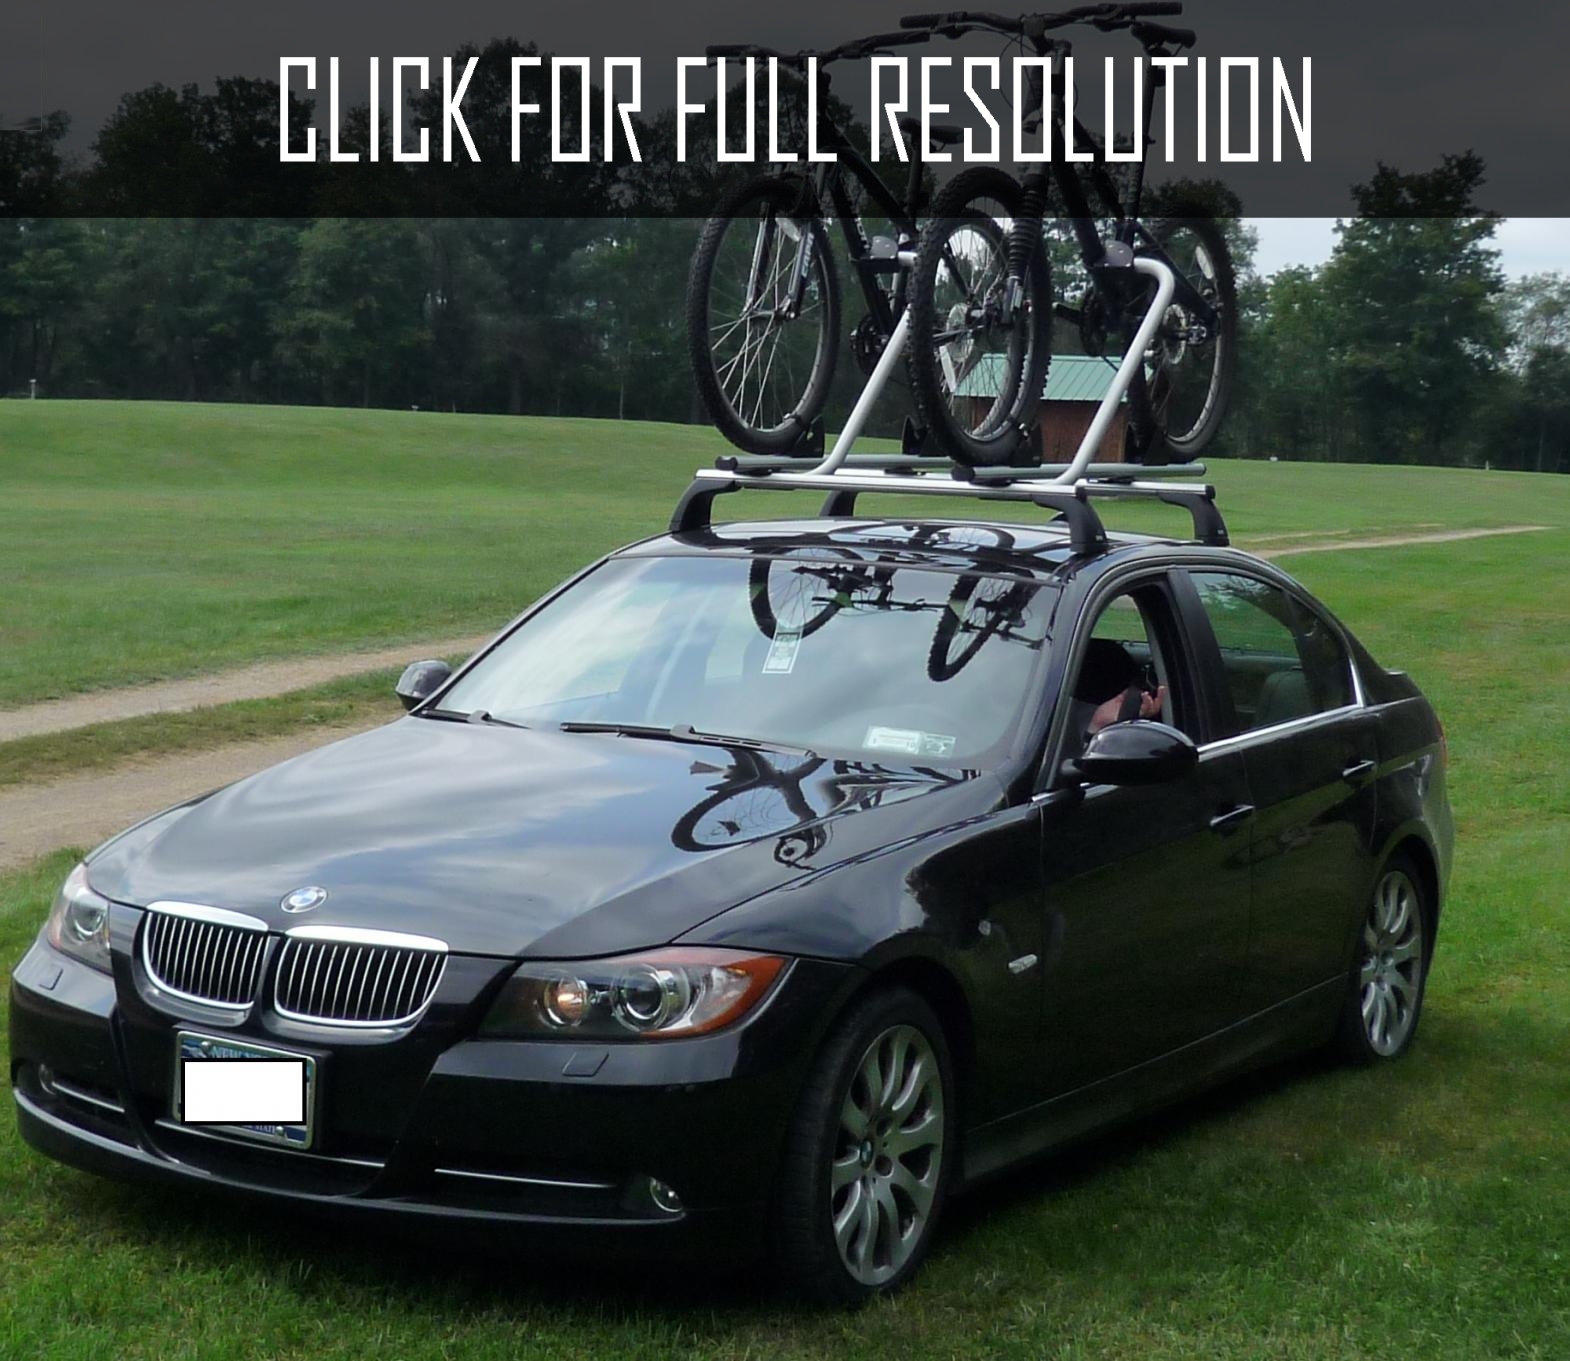 Bmw 3 Series Bike Rack - reviews, prices, ratings with various photos Best Bike Rack For Bmw 3 Series